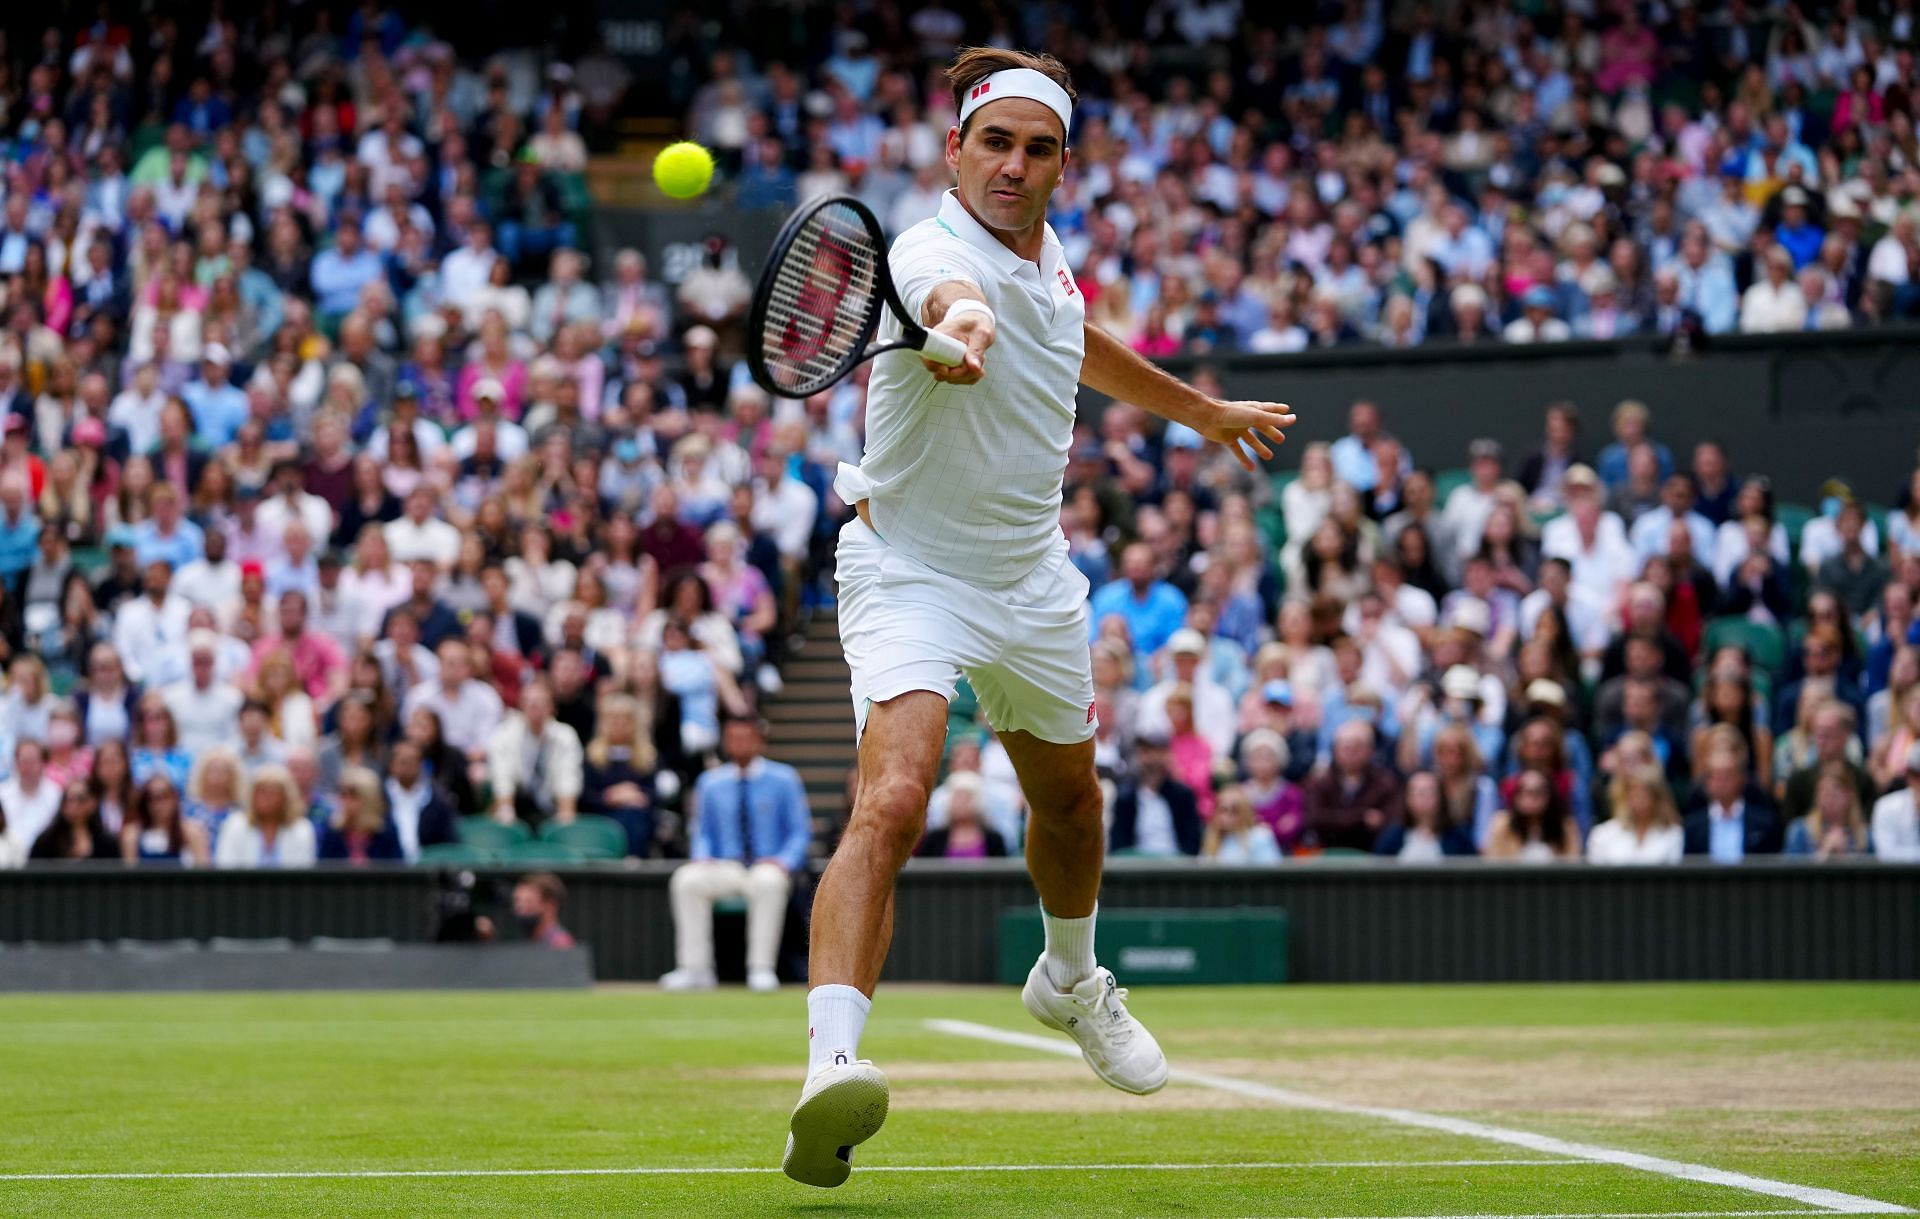 Roger Federer is yet to play a match since Wimbledon